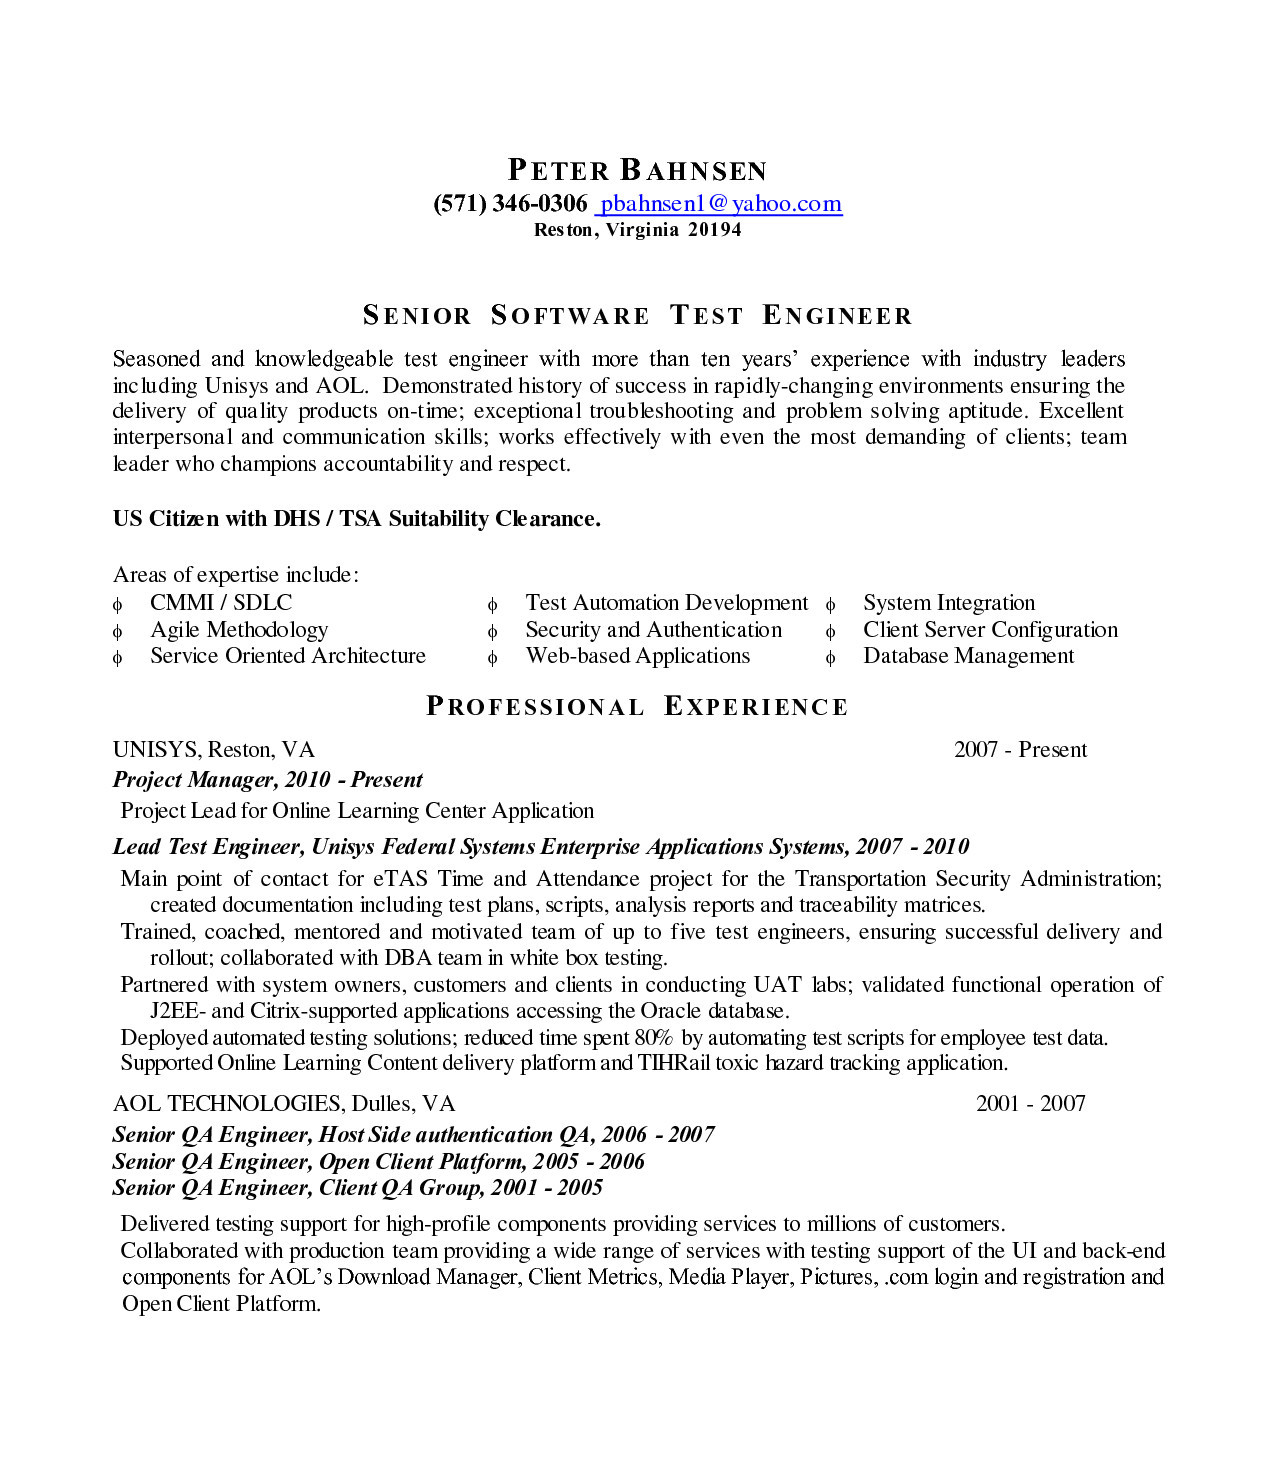 sample resume for software test engineer with experience